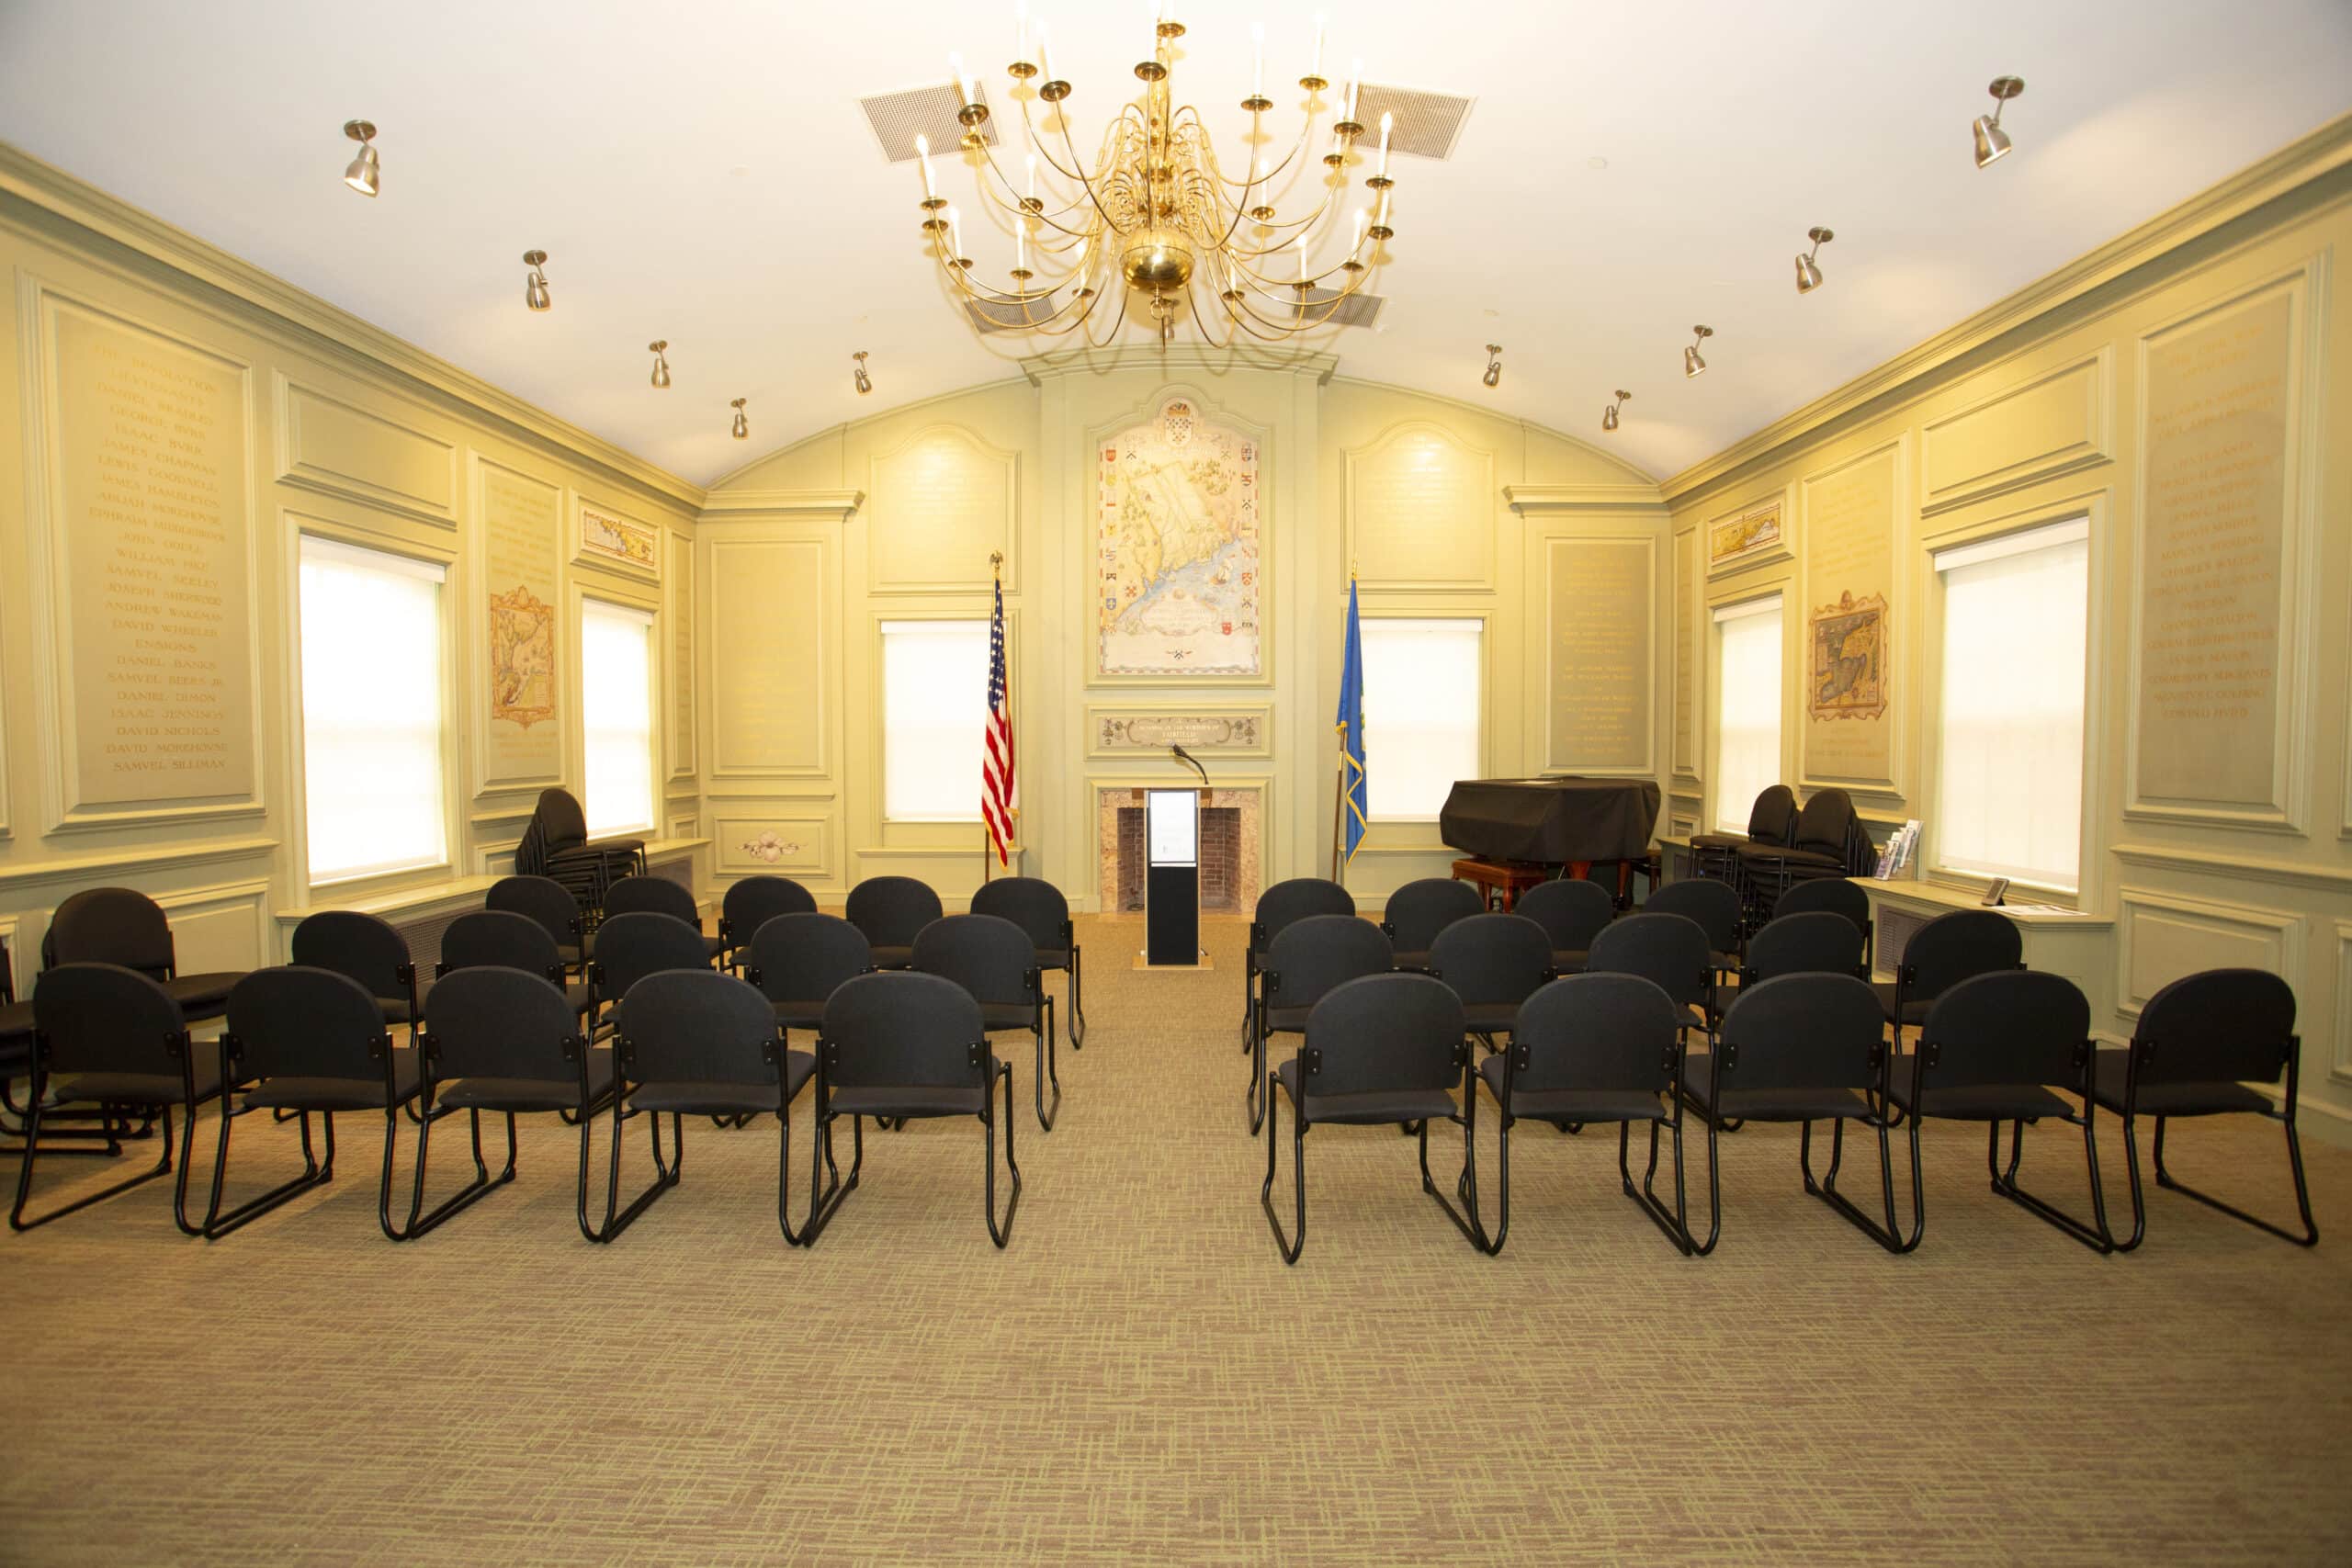 image of memorial room with two sections of chairs in rows separated by a center aisle